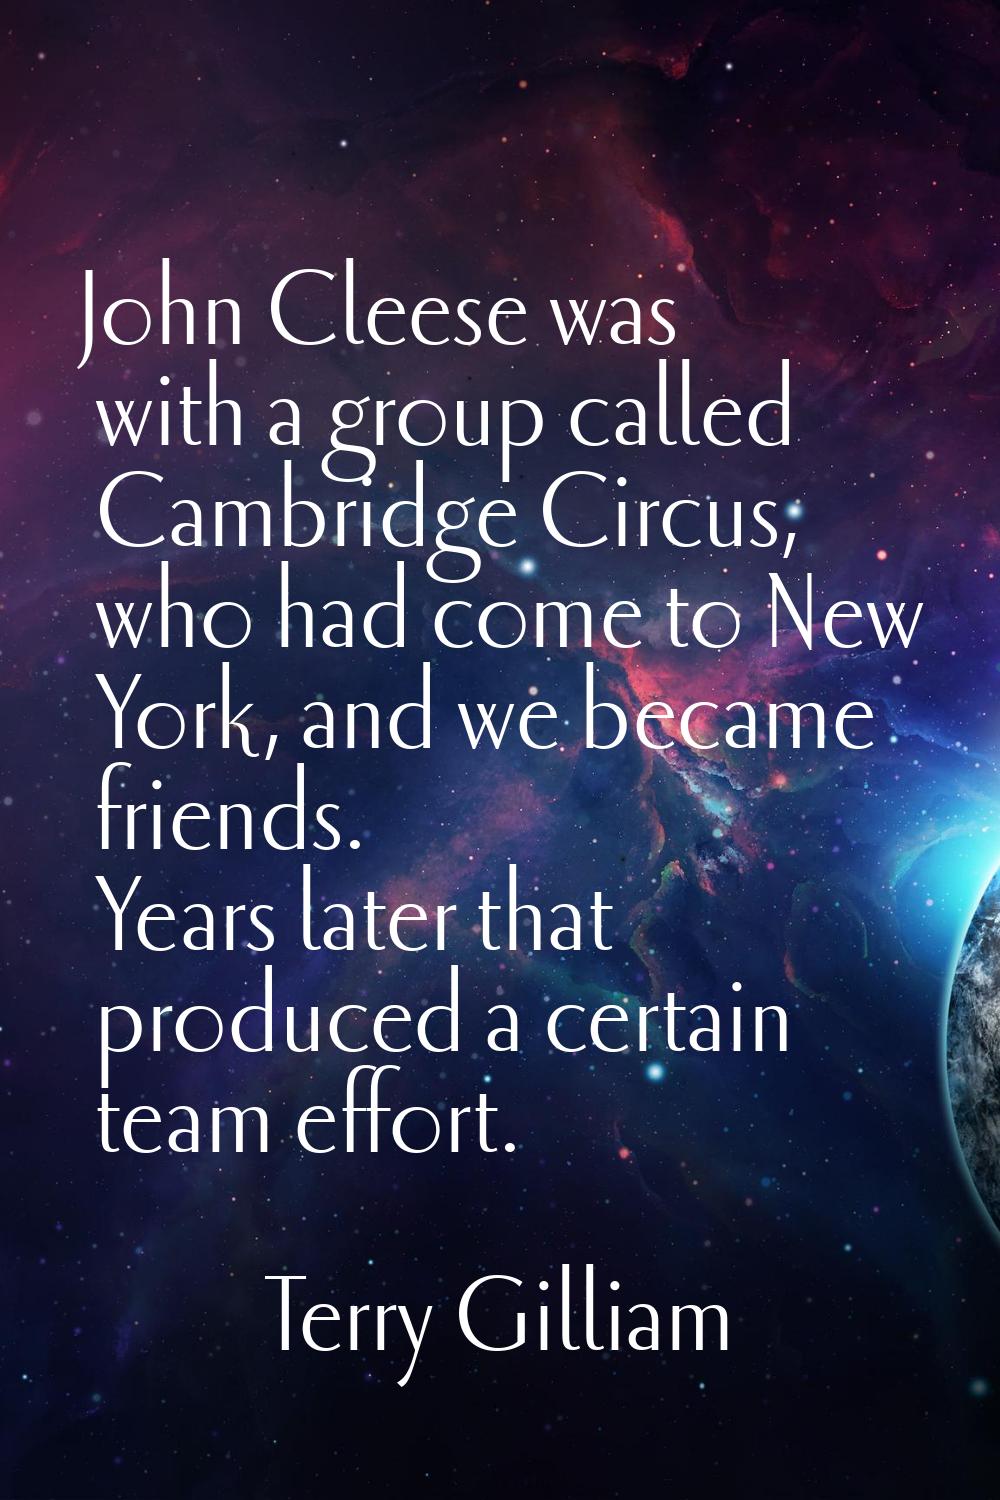 John Cleese was with a group called Cambridge Circus, who had come to New York, and we became frien